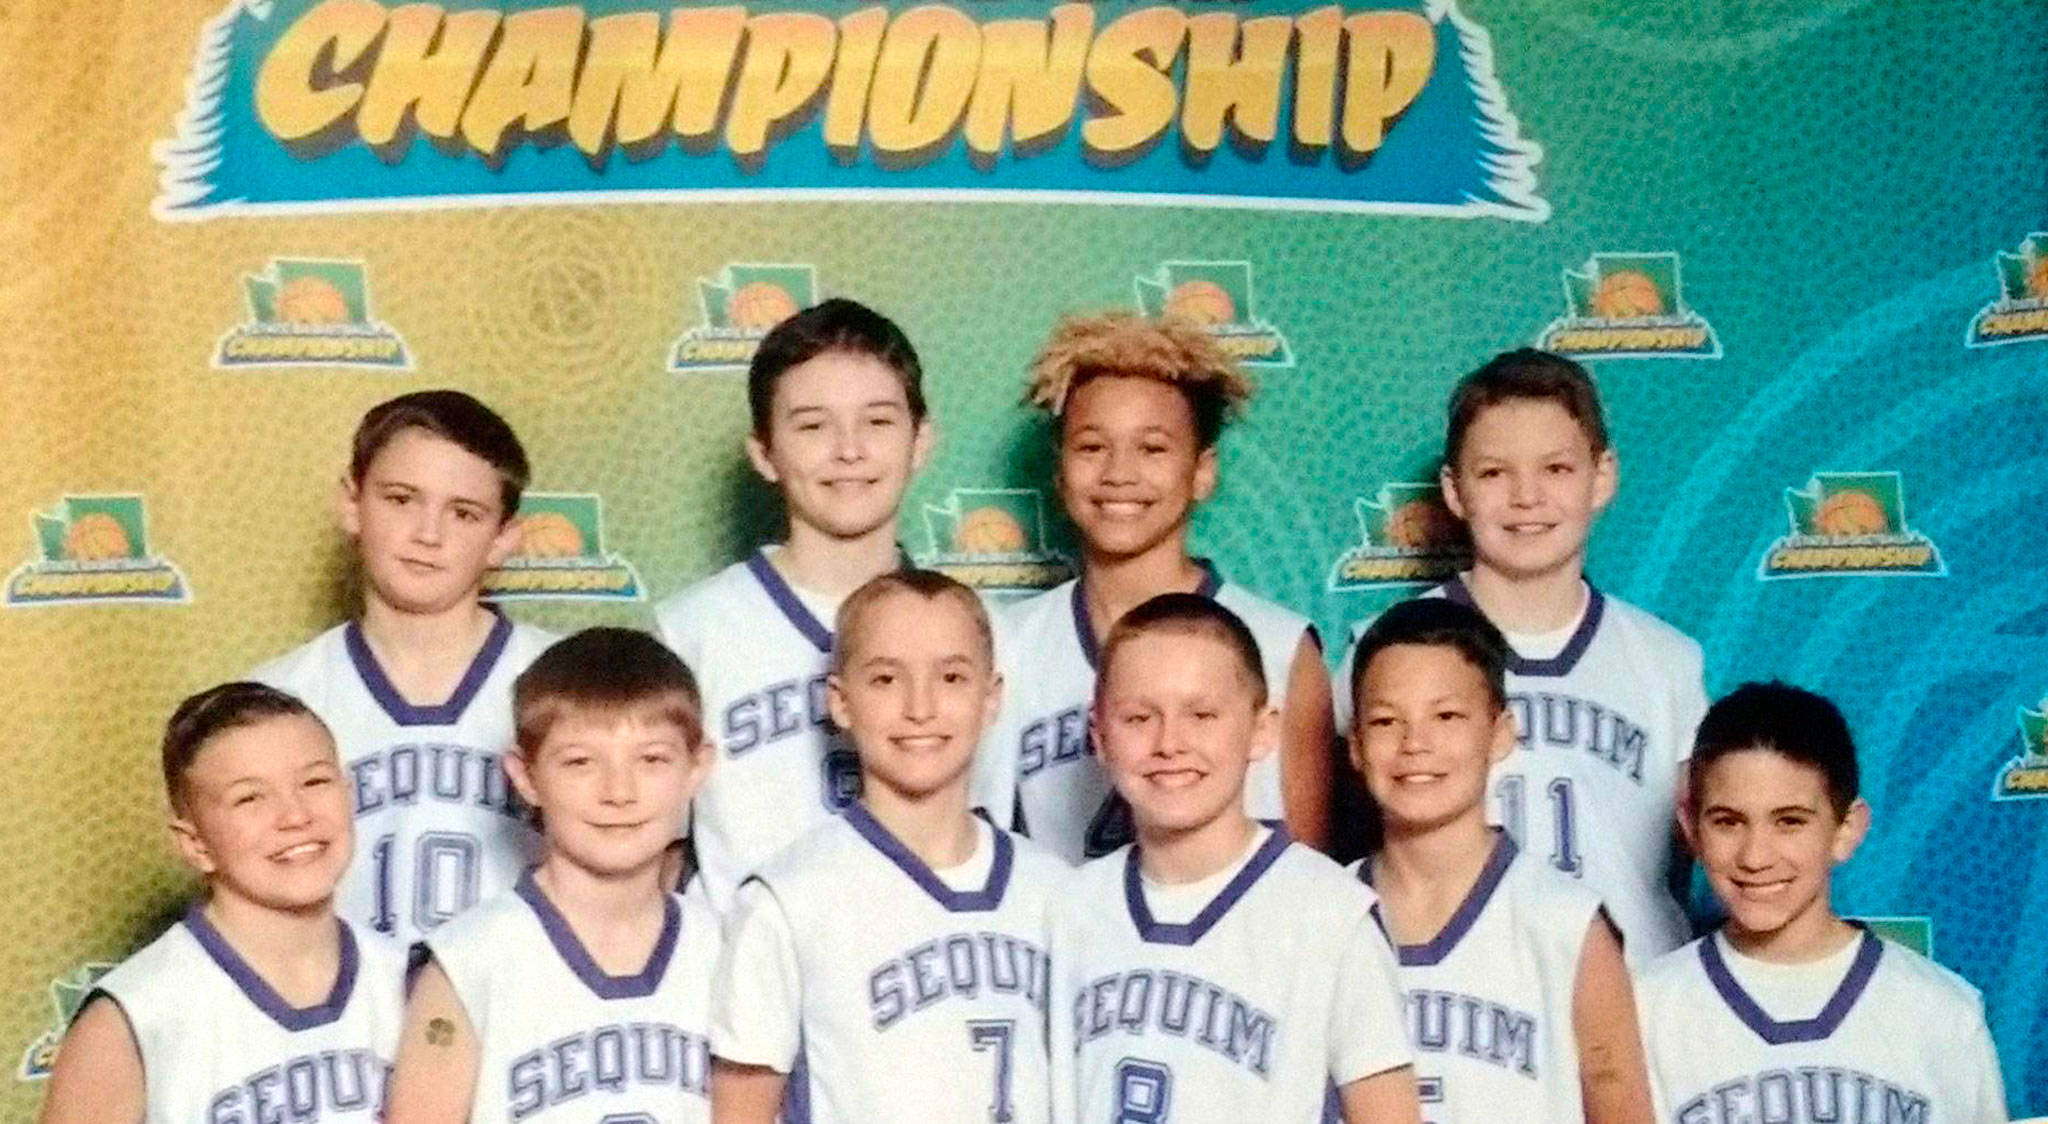 Sequim’s fifth-grade select boys basketball squad took runner-up in the fifth-grade silver division for the 2018 Washington Middle School Basketball Championship March 17-18 in Spokane. The team featured, from top left, Hayden Kiesser, Jamison Gray, Lincoln Liggins, Charlie Grider; bottom left, Izaiah Alonzo, Ethan Melnick, Easton Munger, Blake Marshall, Andrew Brown and Bryant Laboy. Photo courtesy of Mary Laboy